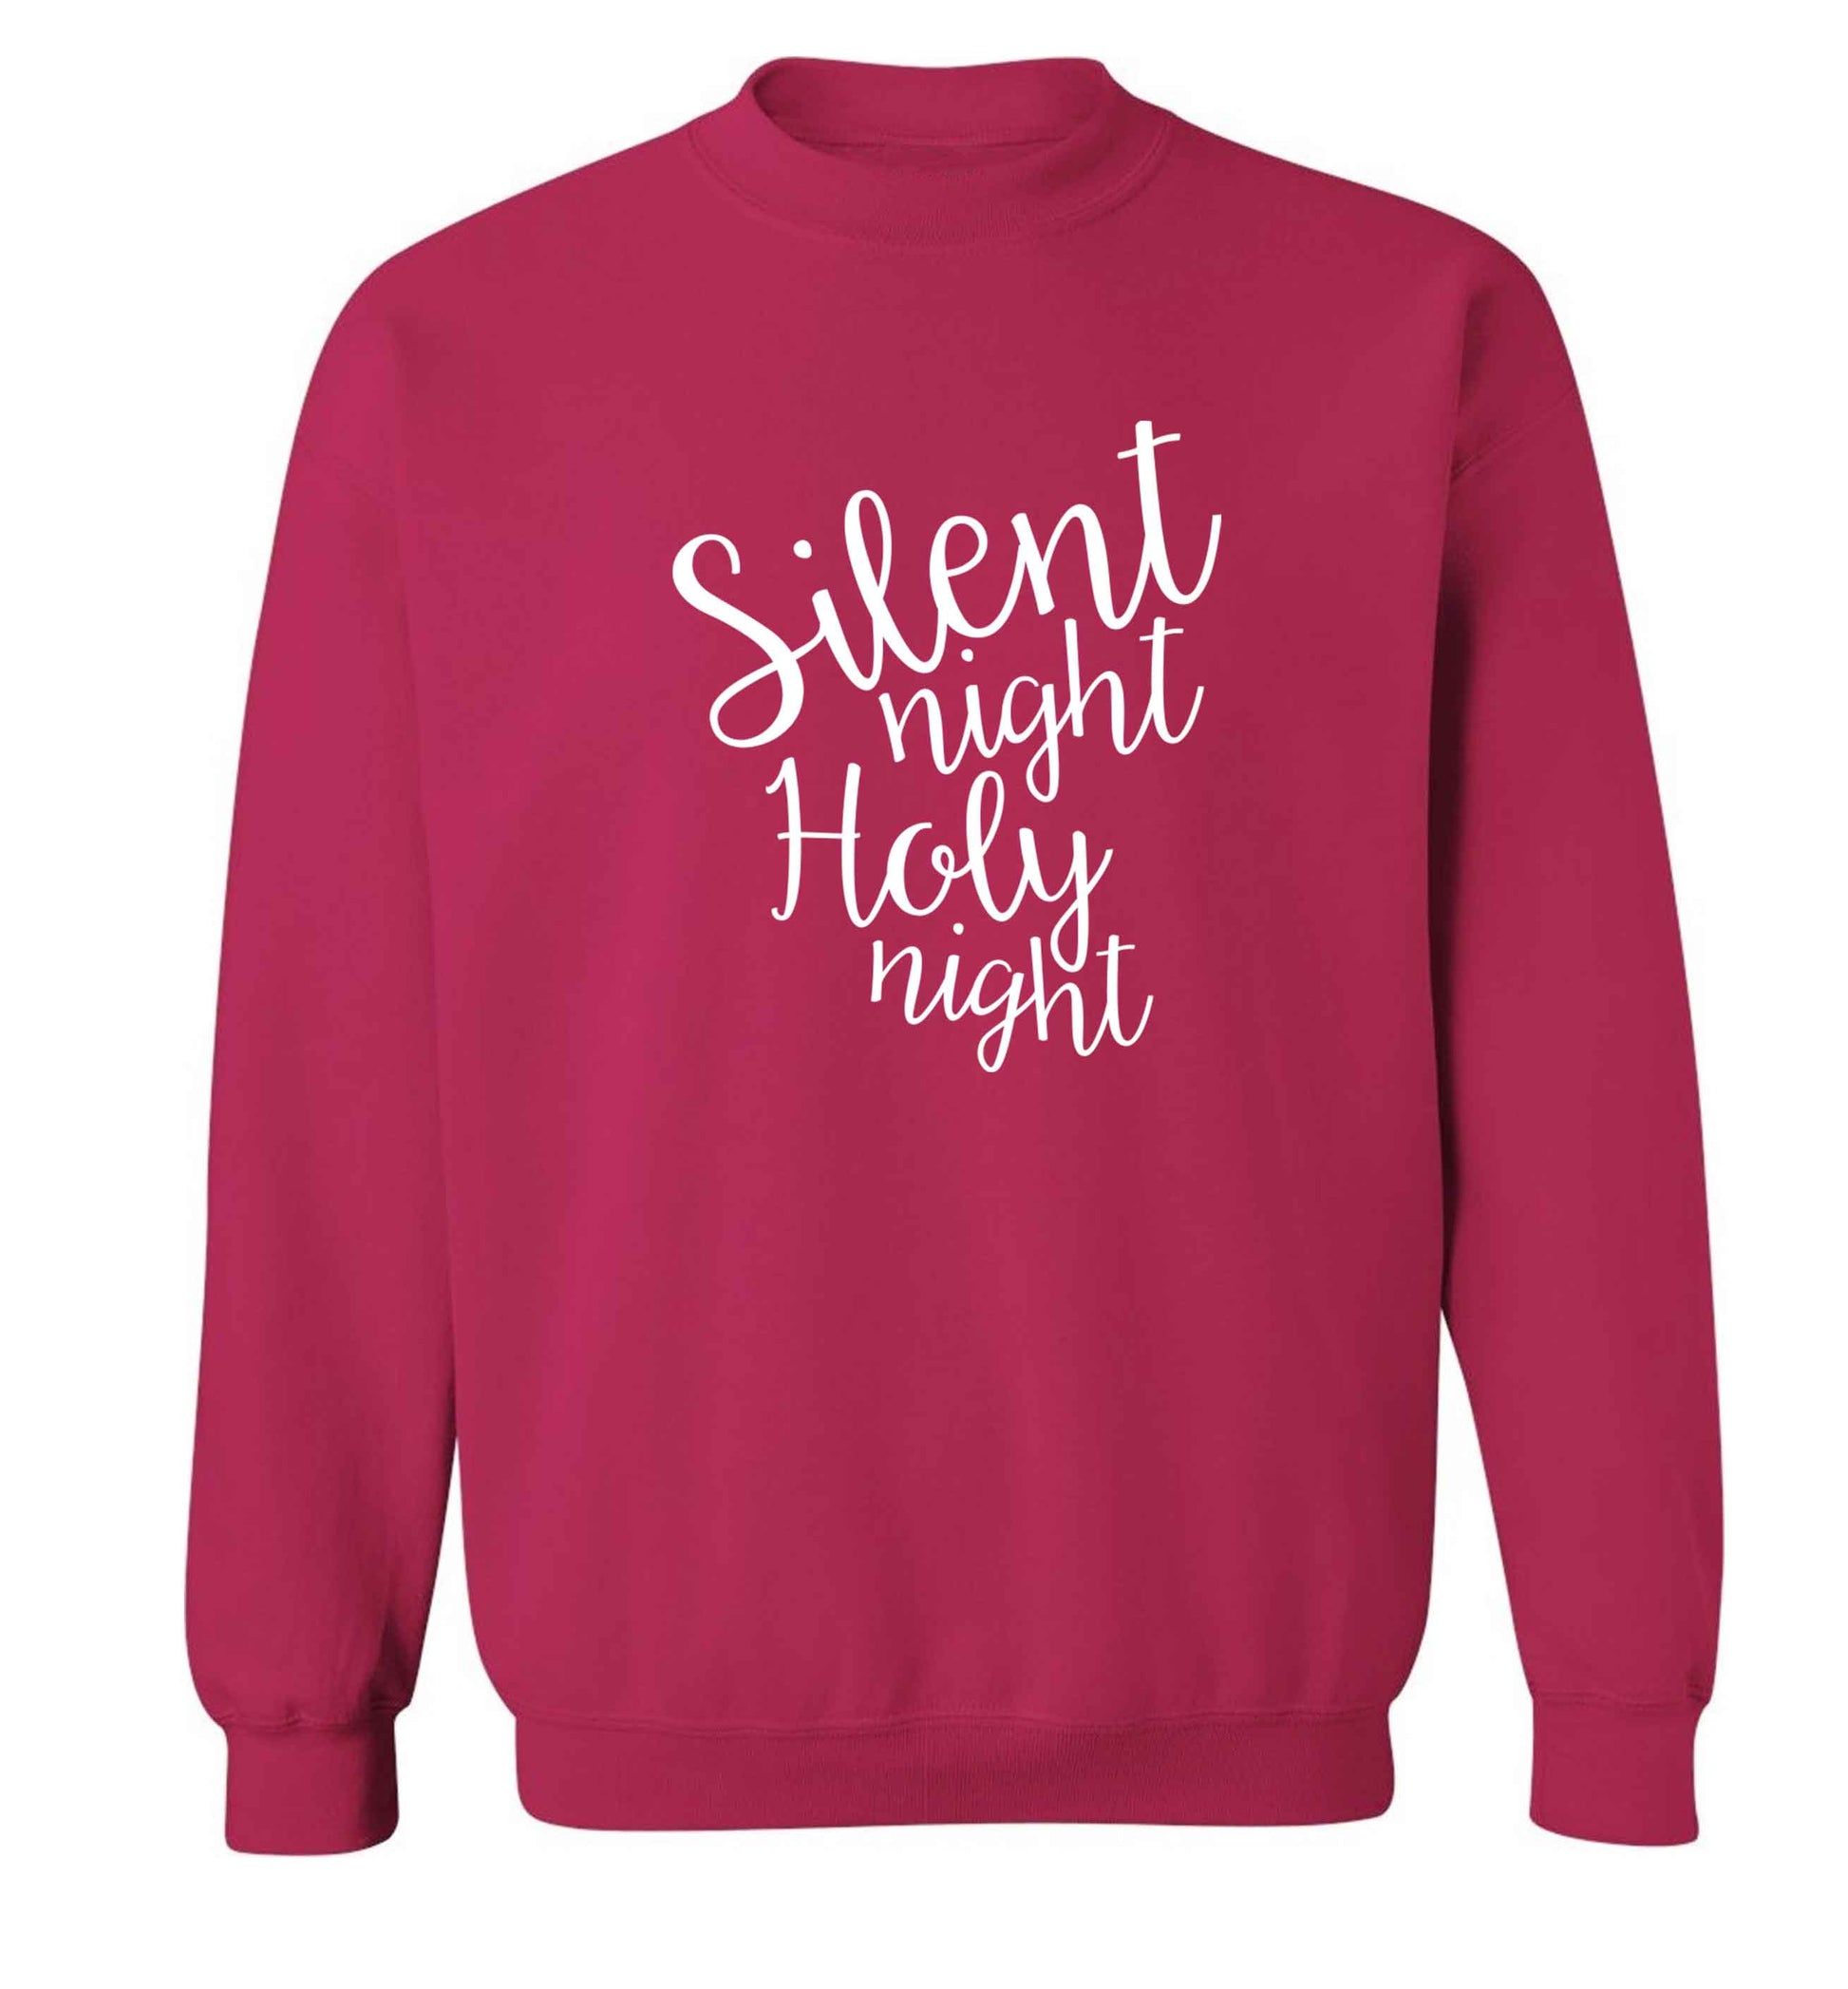 Silent night holy night adult's unisex pink sweater 2XL